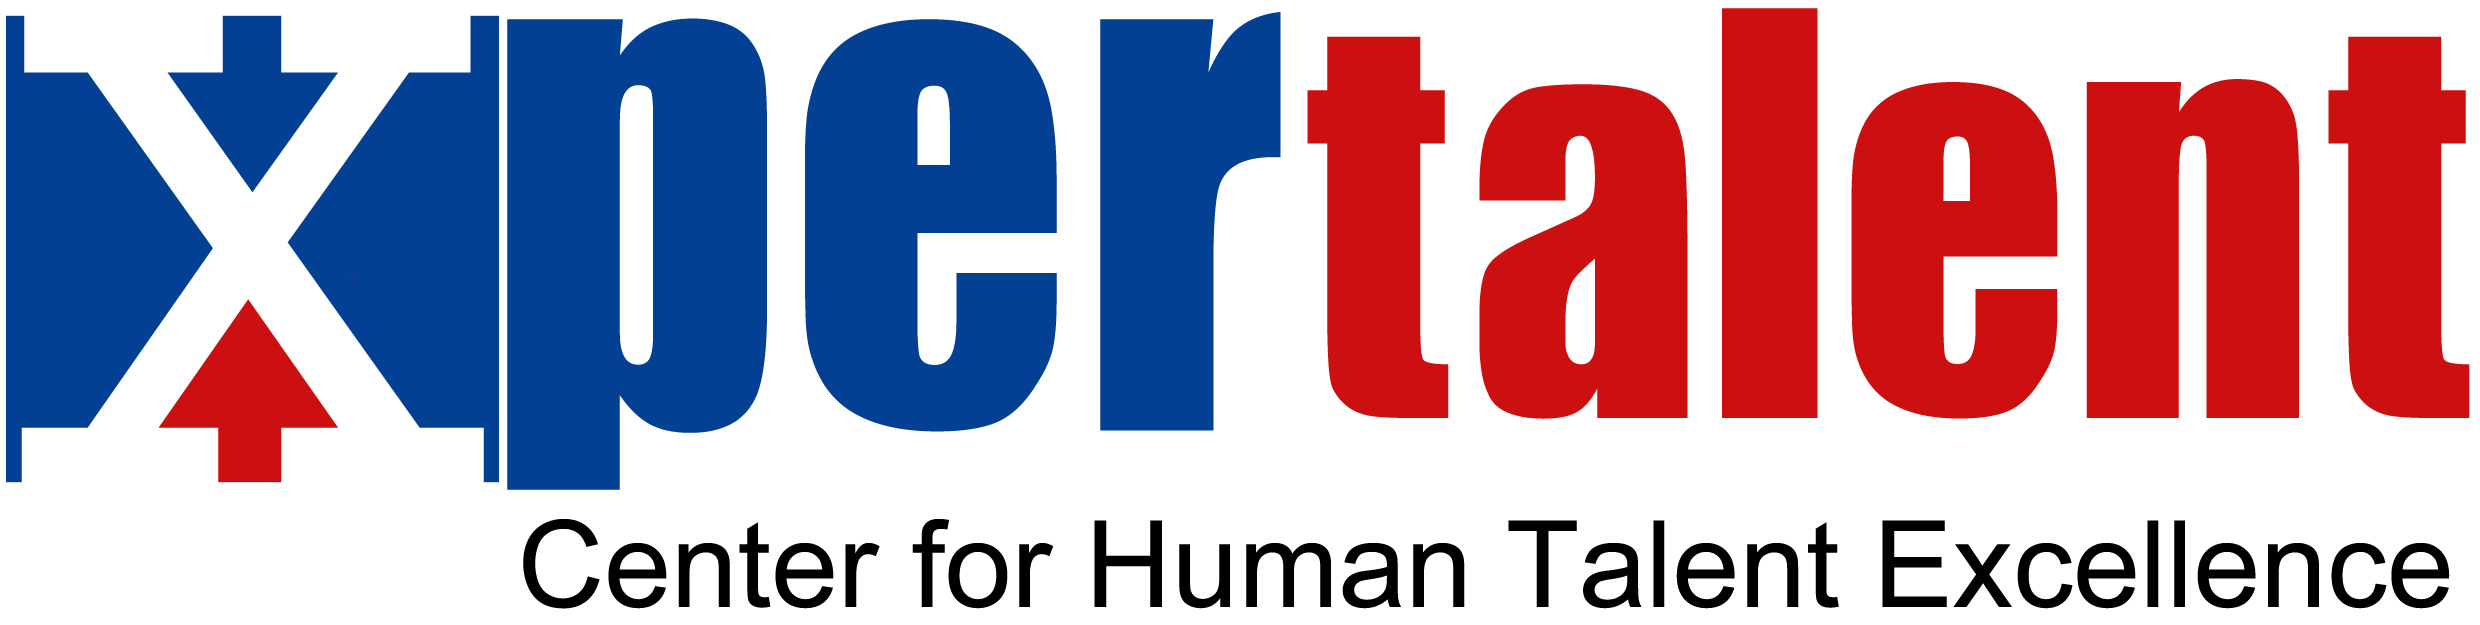 Xpertalent center for human talent excellence 